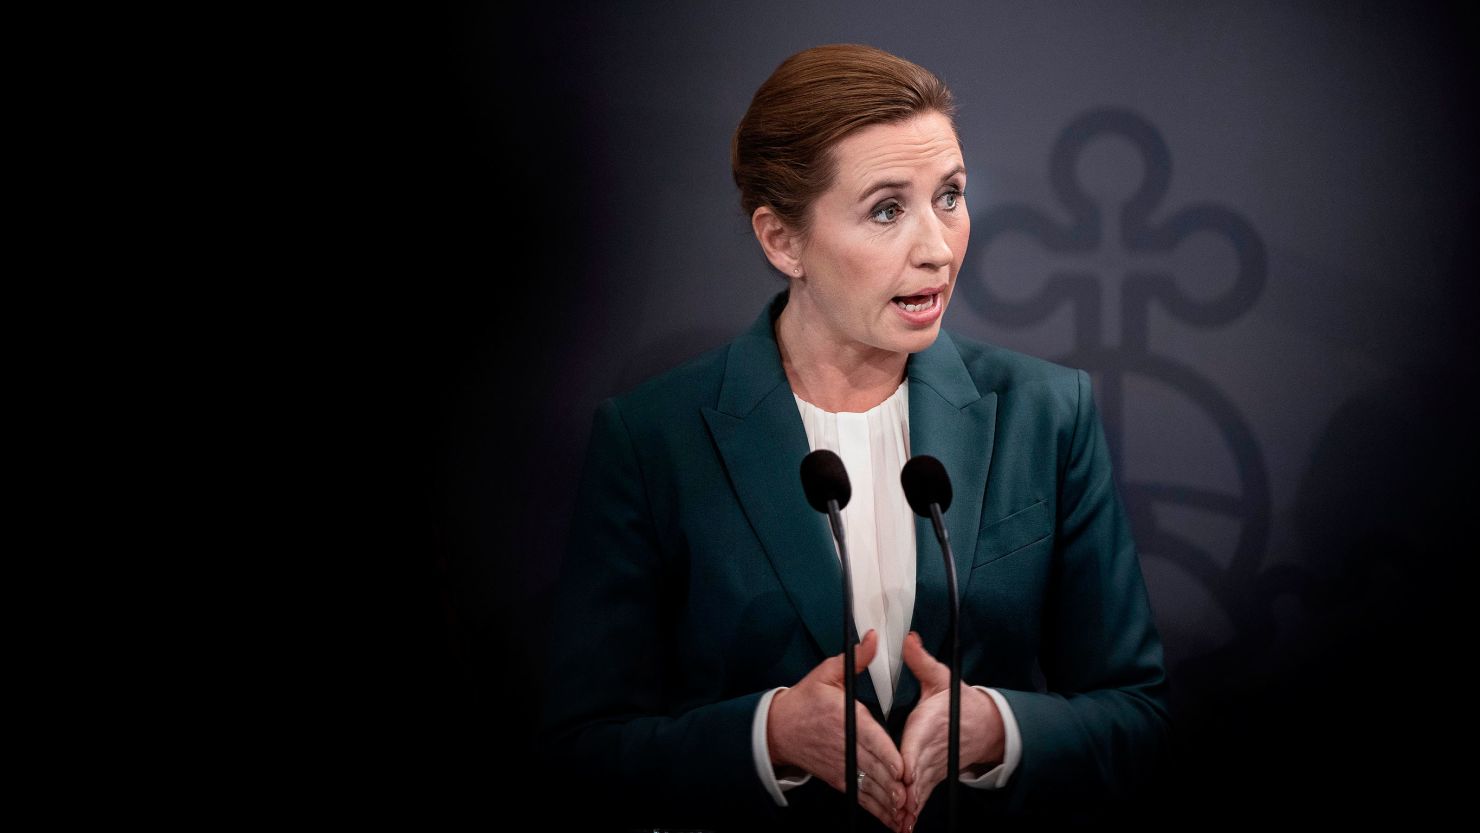 Denmark's Prime Minister Mette Frederiksen gives a press statement to comment on the situation concerning the spread of the novel coronavirus, in the Prime Ministry in Copenhagen, on March 10, 2020. - Denmark so far has registered 156 persons potisiv with the COVID-19 disease.